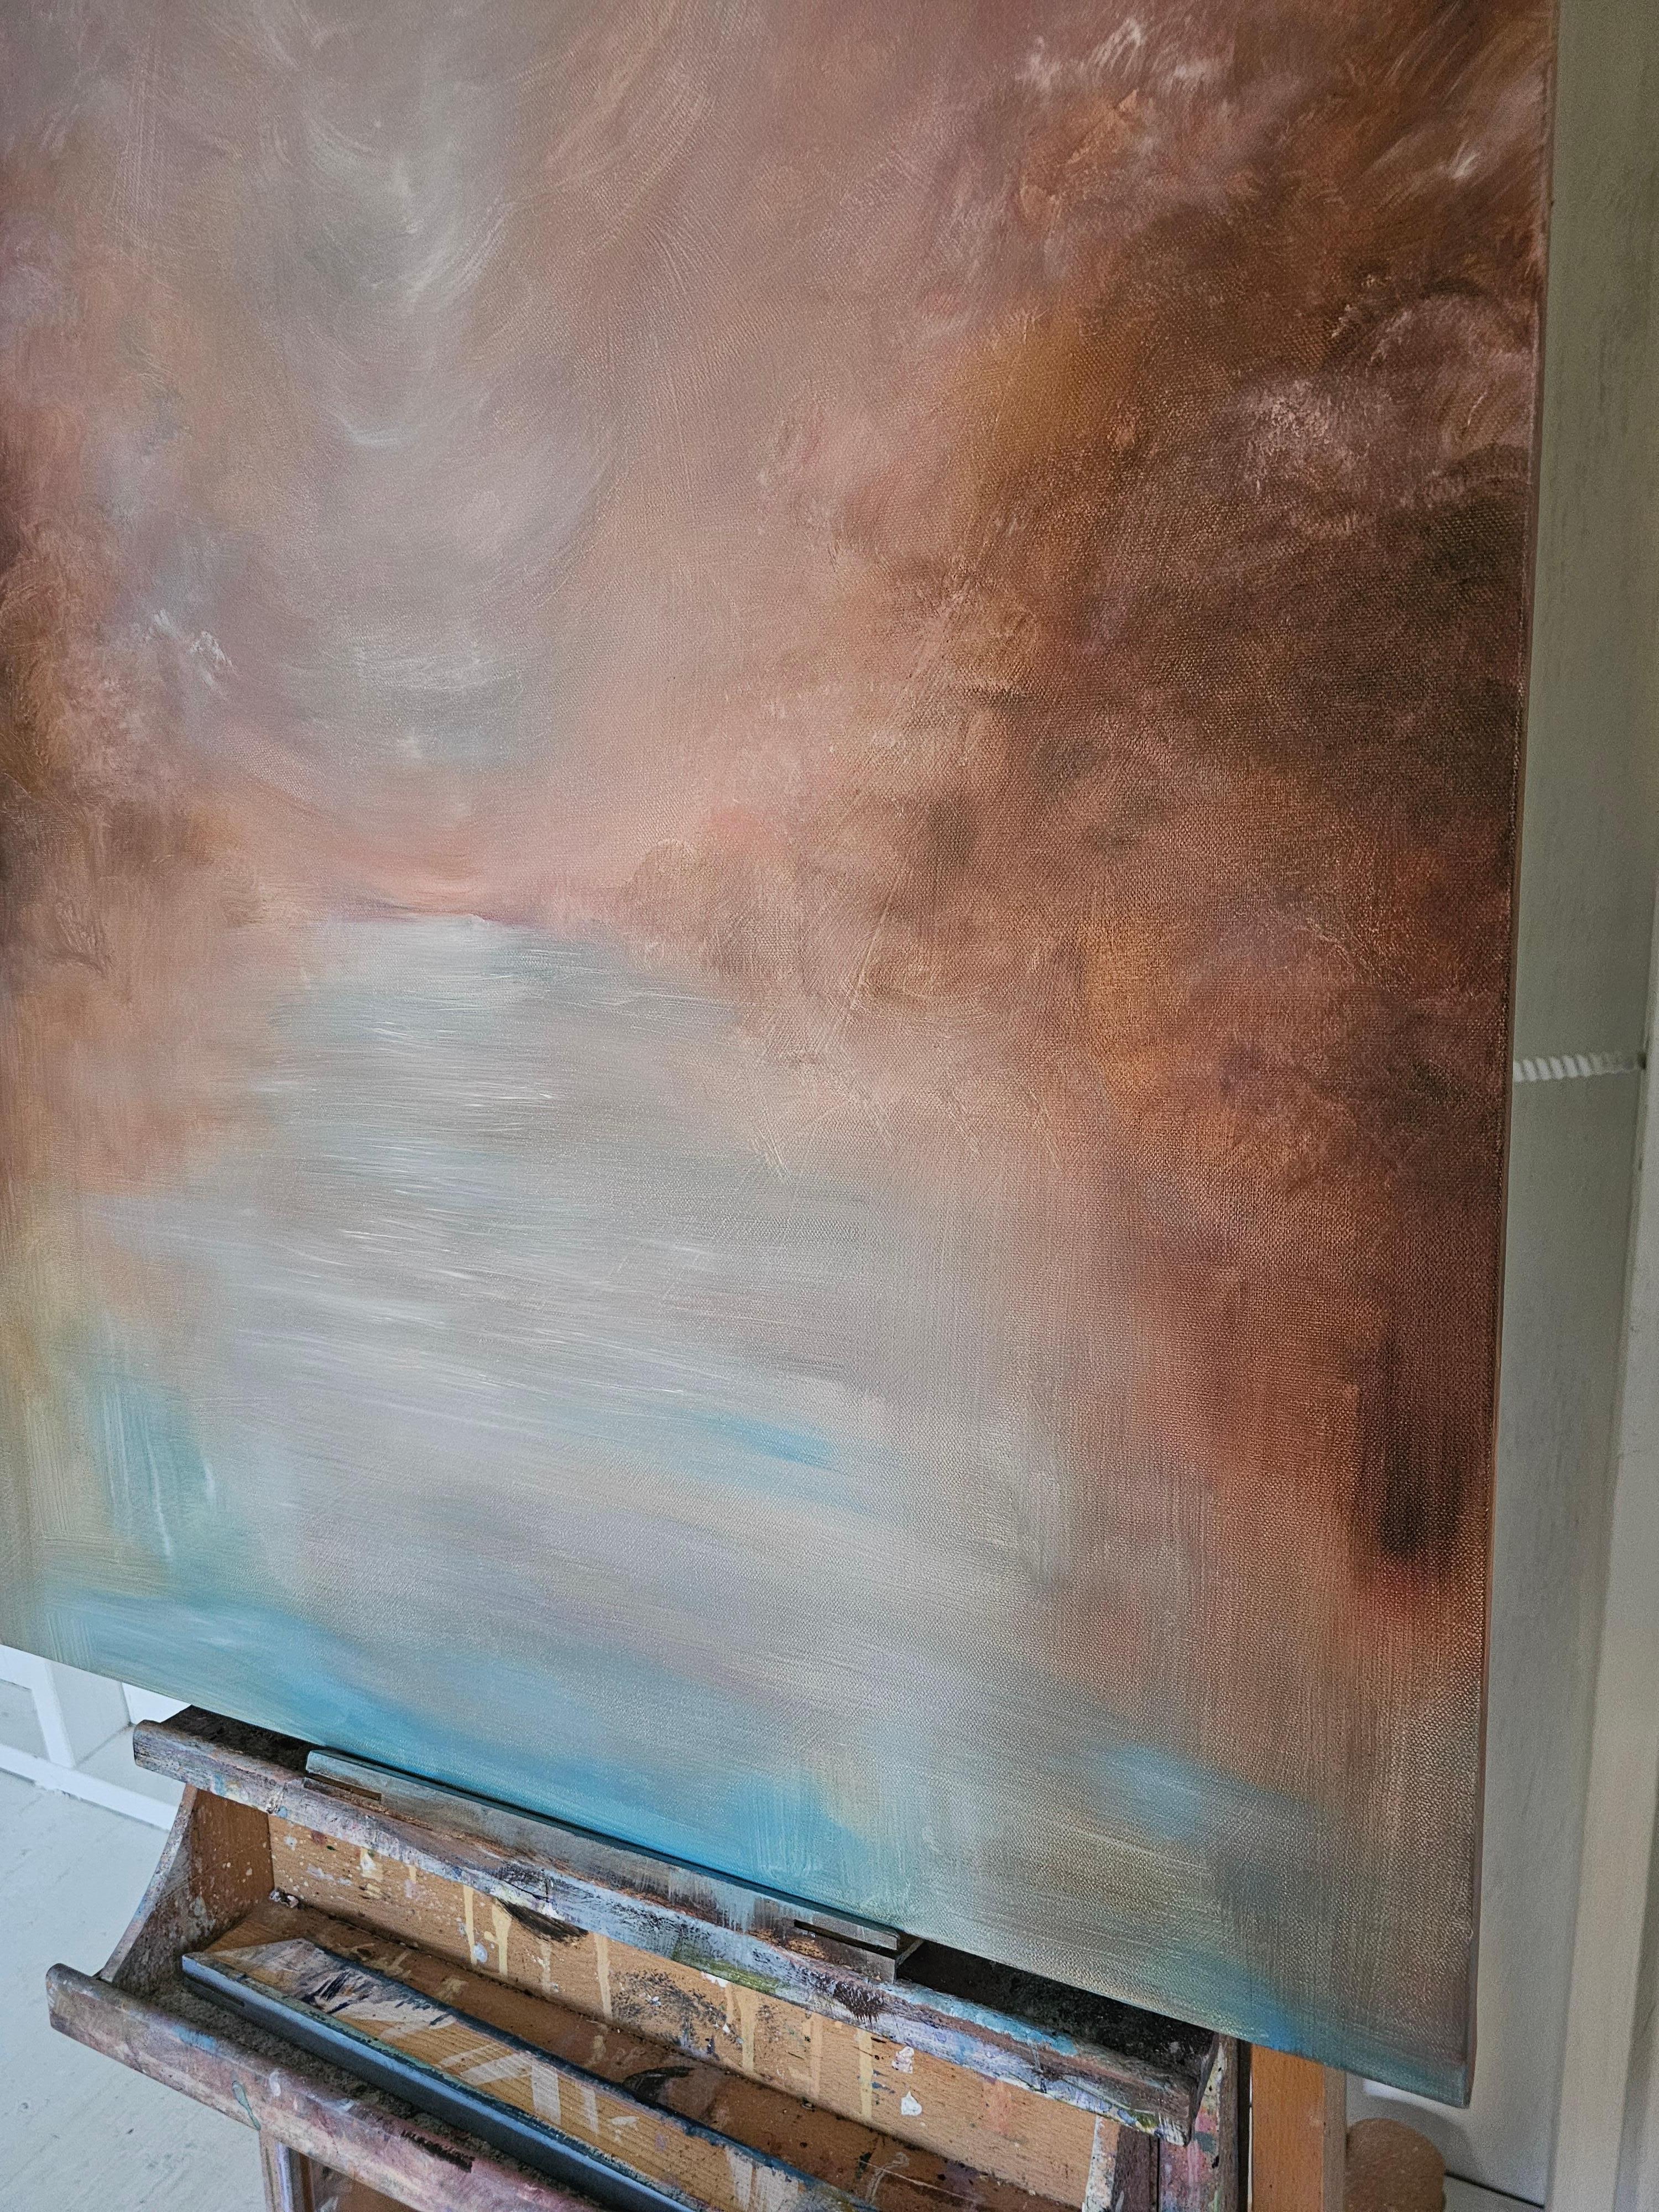 This is what hope feels like - Abstract atmospheric landscape water painting - Abstract Impressionist Painting by Jennifer L. Baker